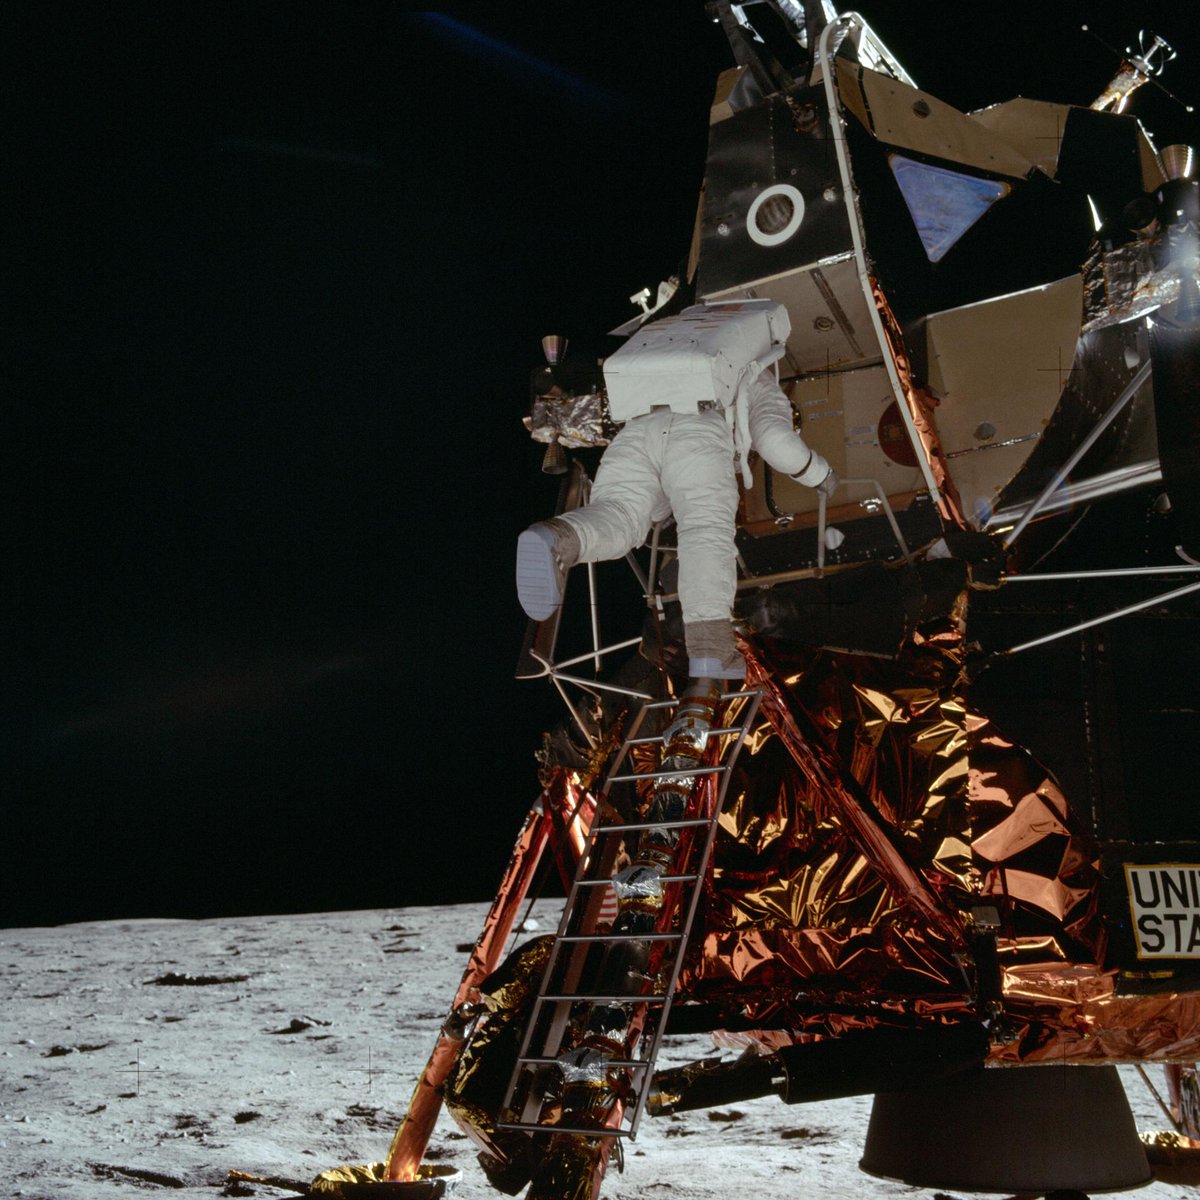 #OTD 54 years ago, 20 July 1969, #Apollo11's Neil Armstrong, Mike Collins and Buzz Aldrin made history.

Today, ESA is working with NASA to build on this legacy with international and industry partners to send #Artemis missions #ForwardToTheMoon.

#InternationalMoonDay #ArtemisII